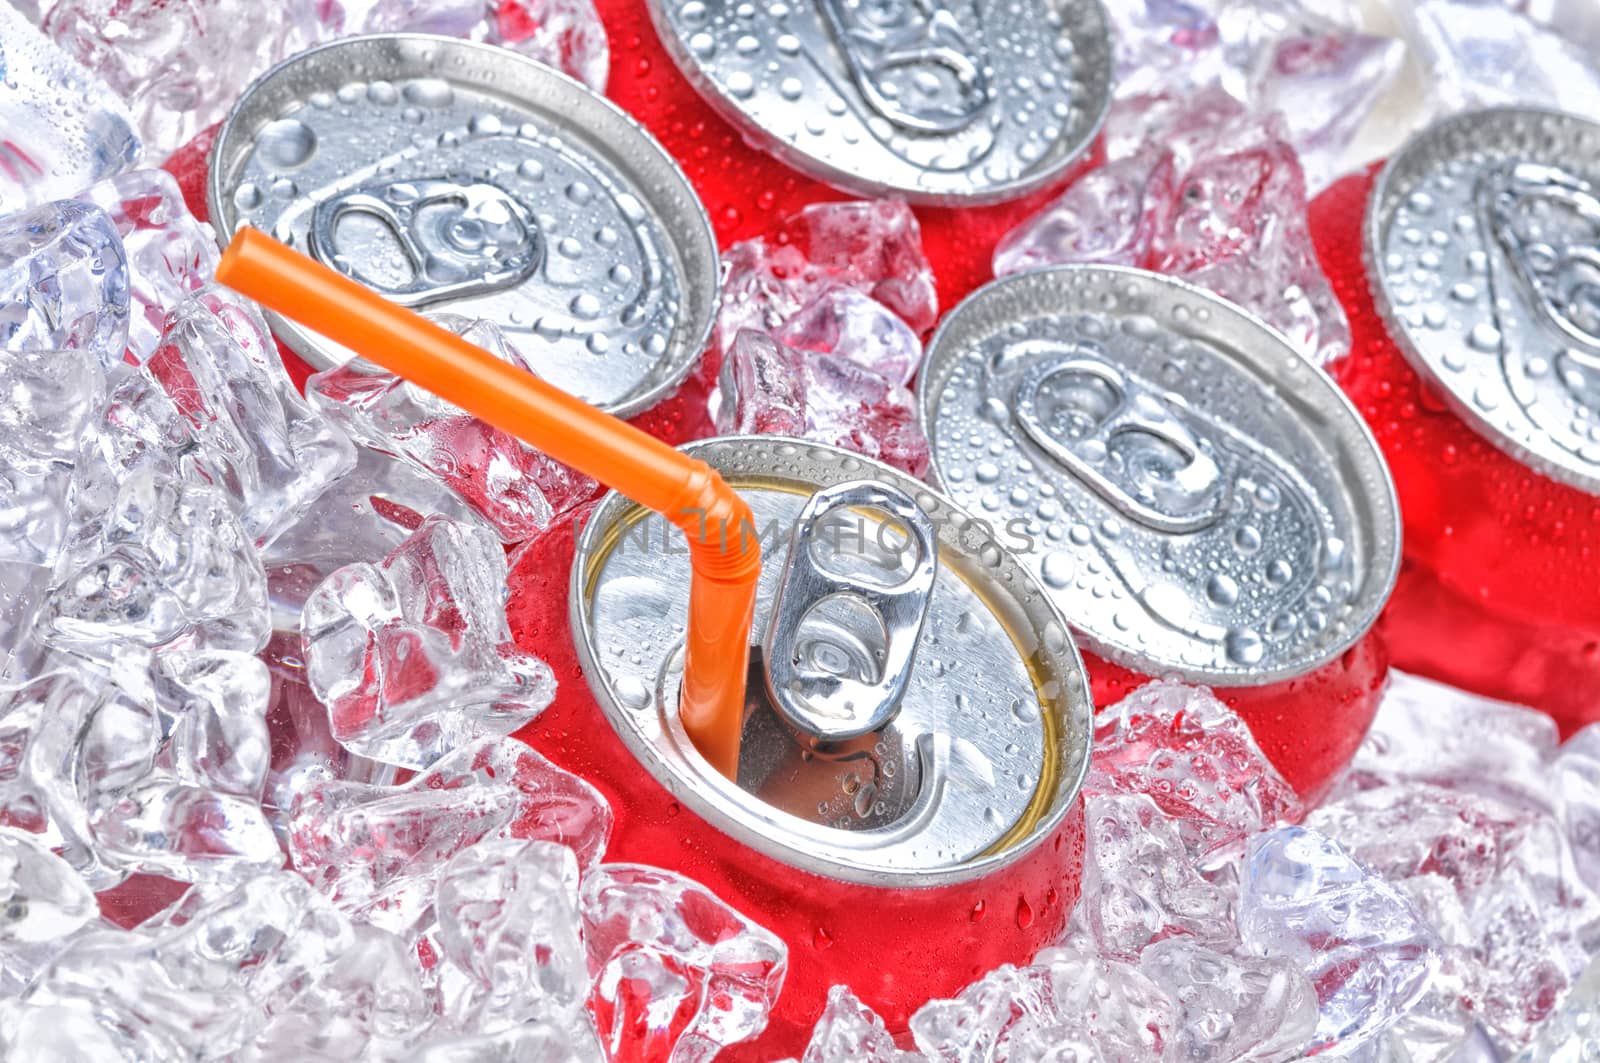 Soda Cans in Ice with Straw by sCukrov